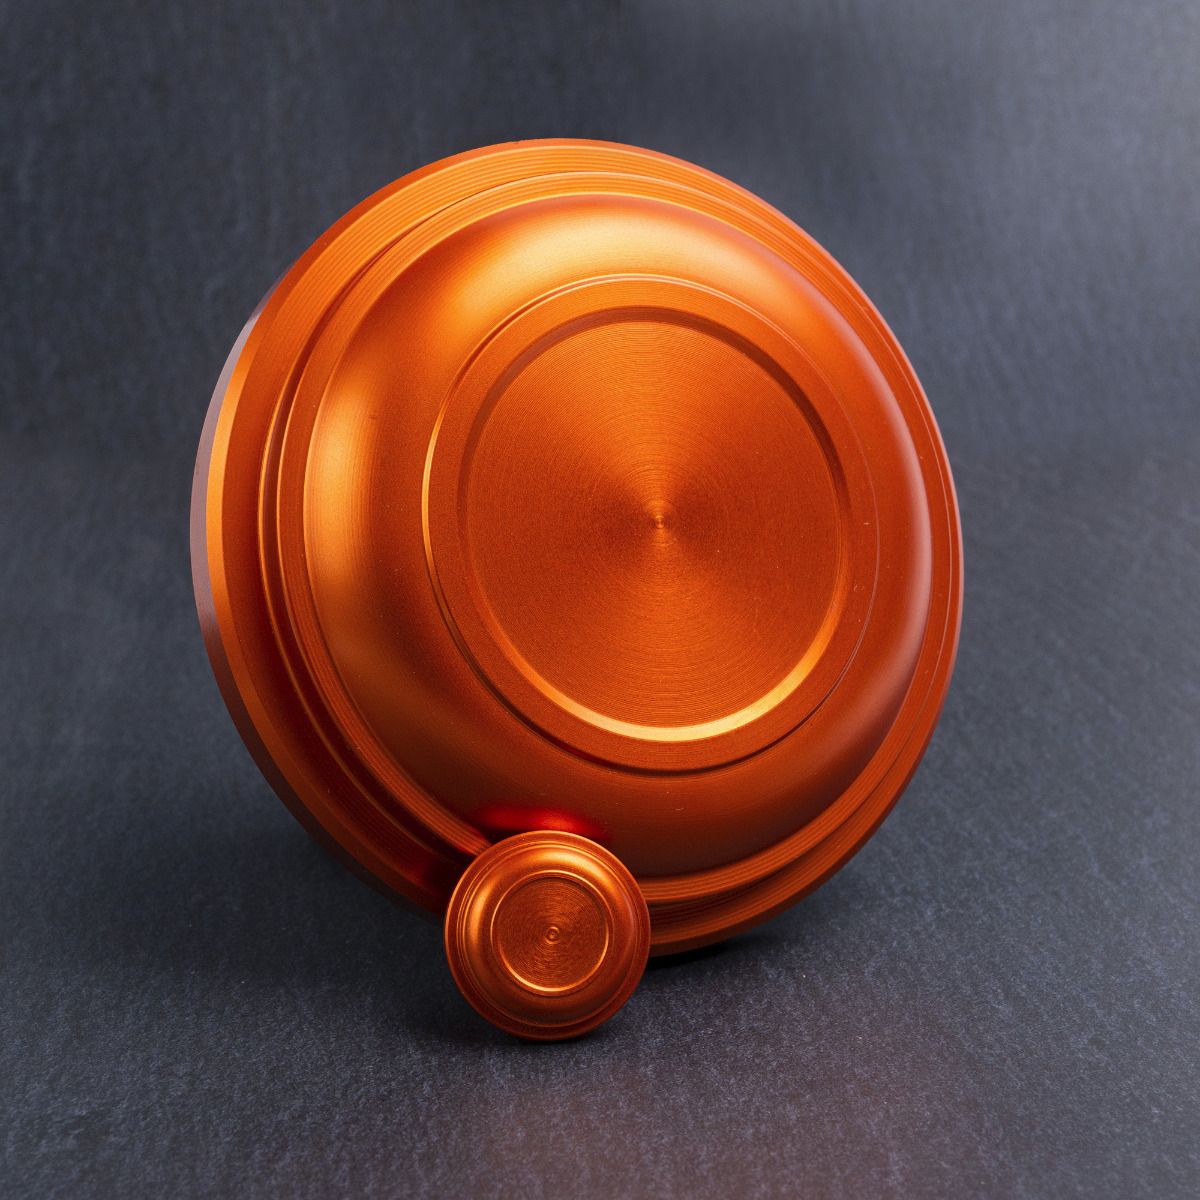 Clay bird machined from aluminum, anodized orange with miniature (sold separately)